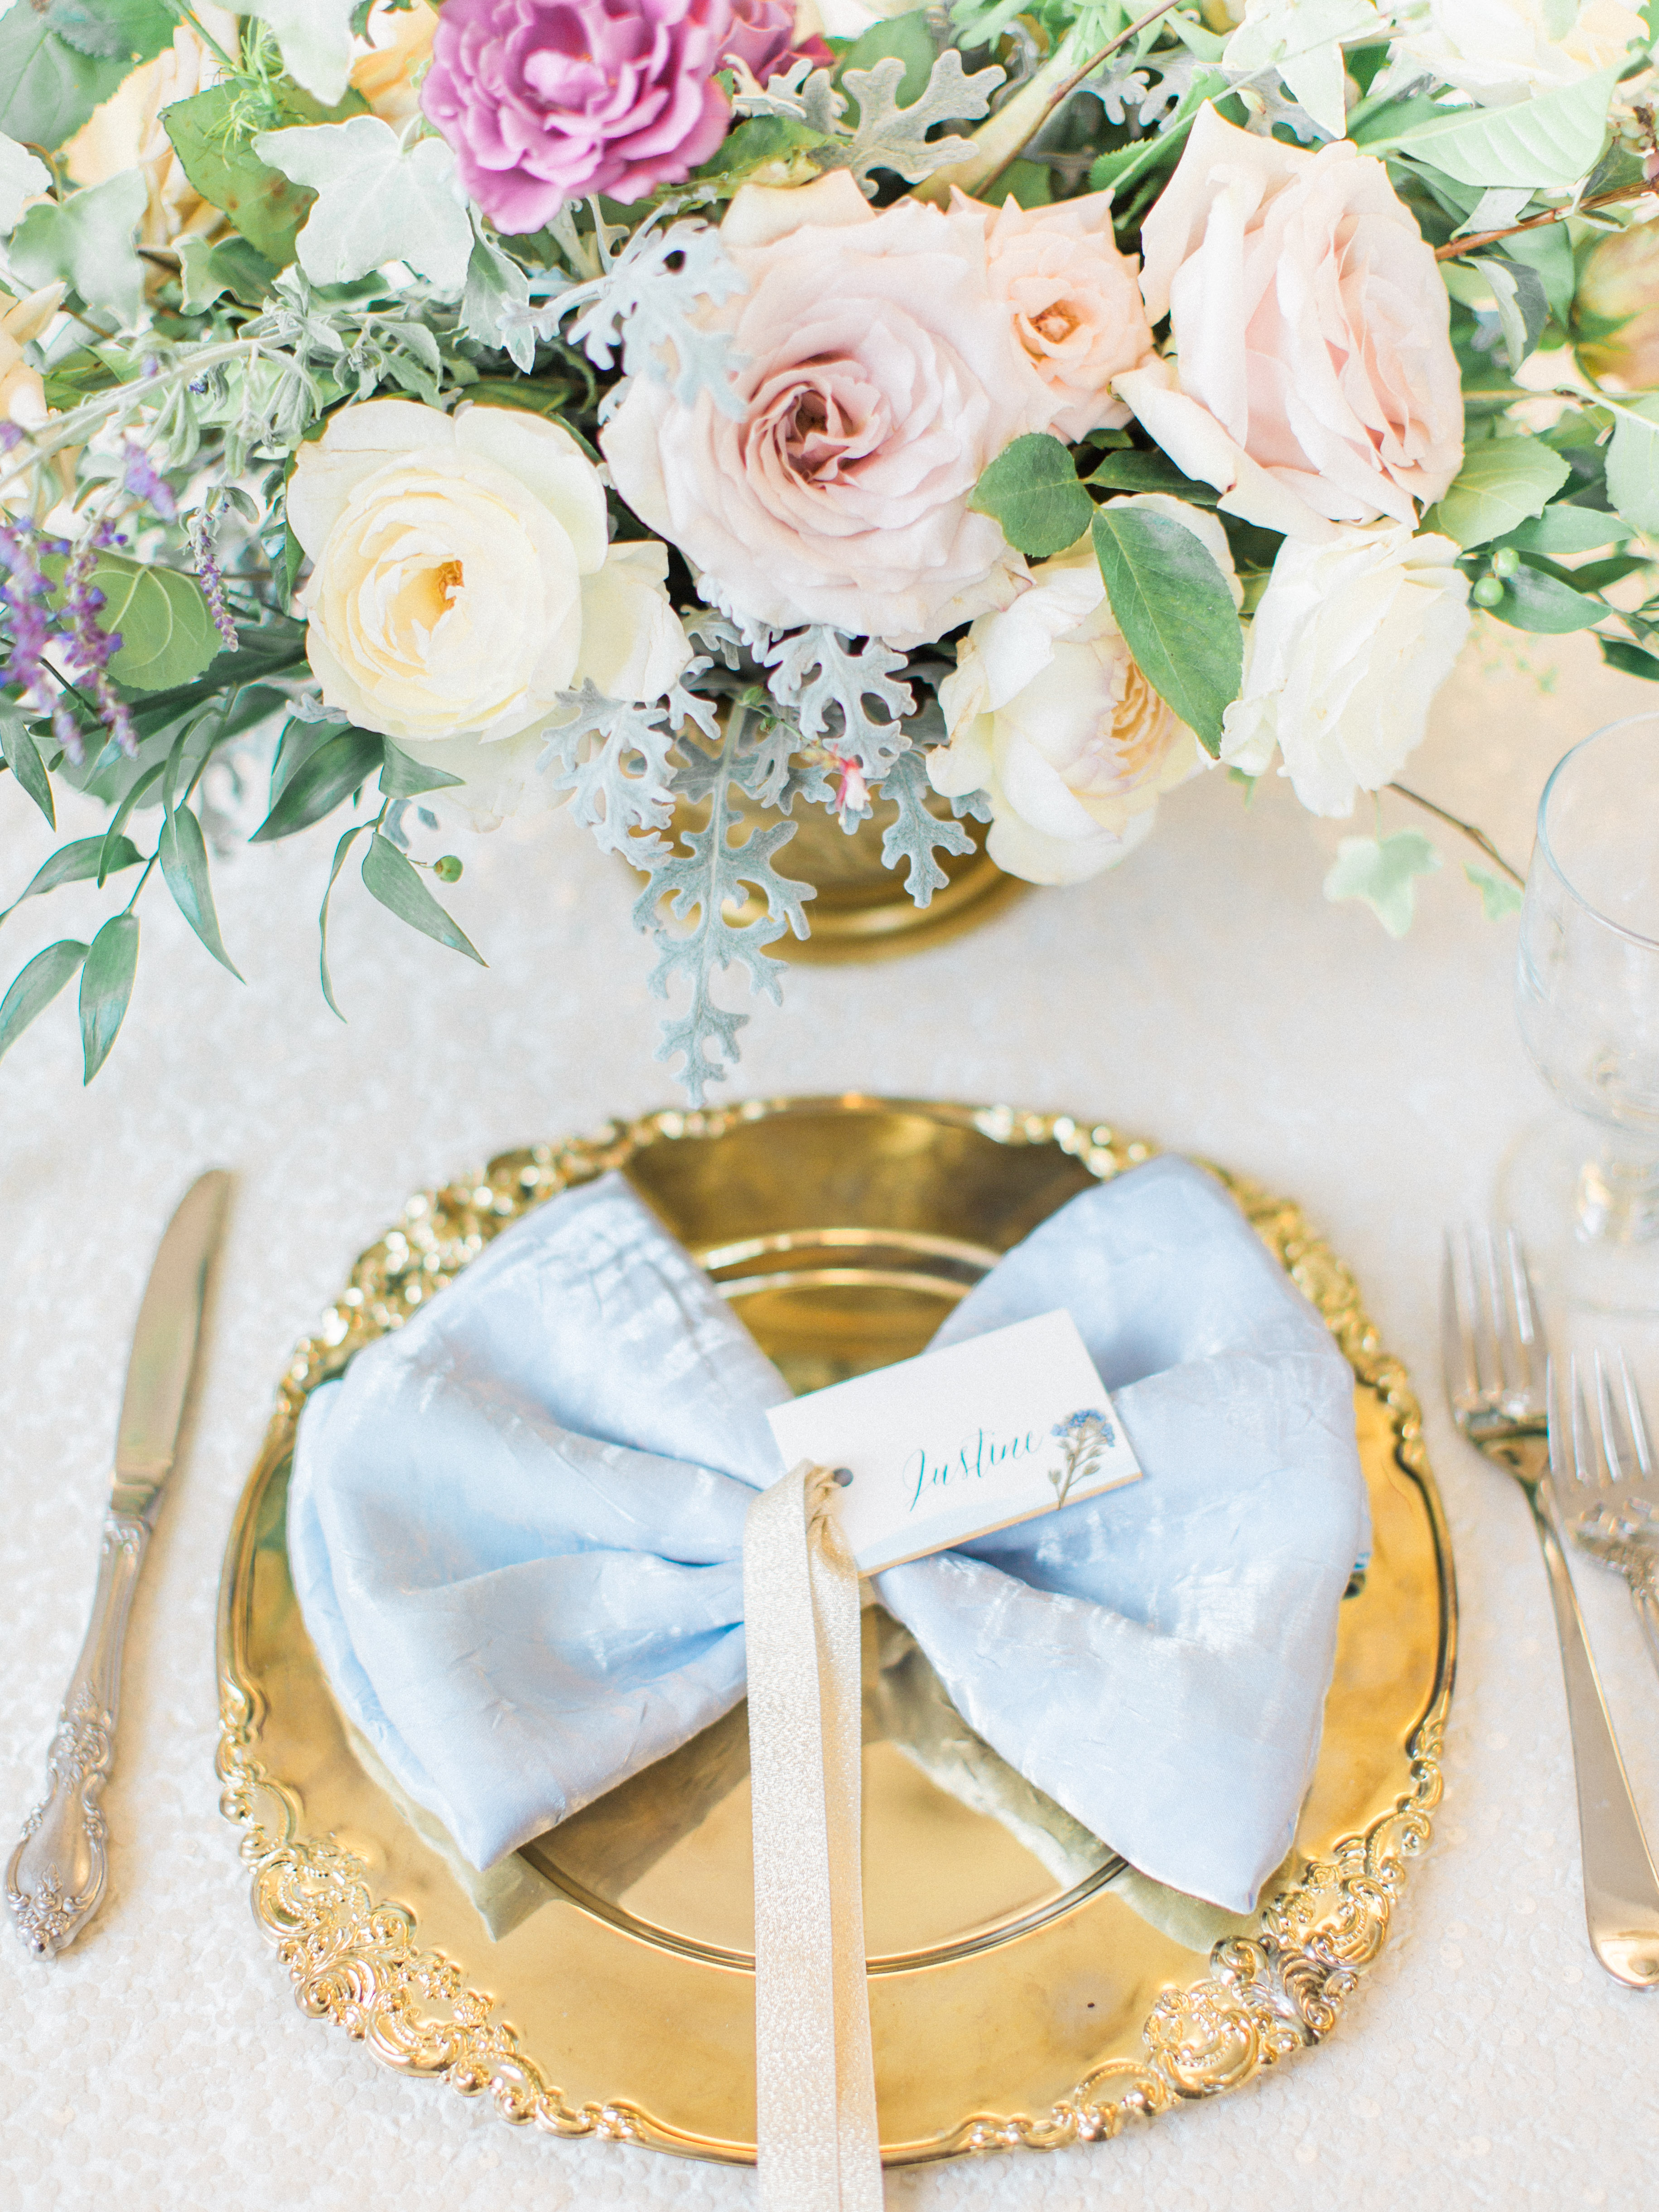 Sweeheart Table | The Day's Design | Samantha James Photography